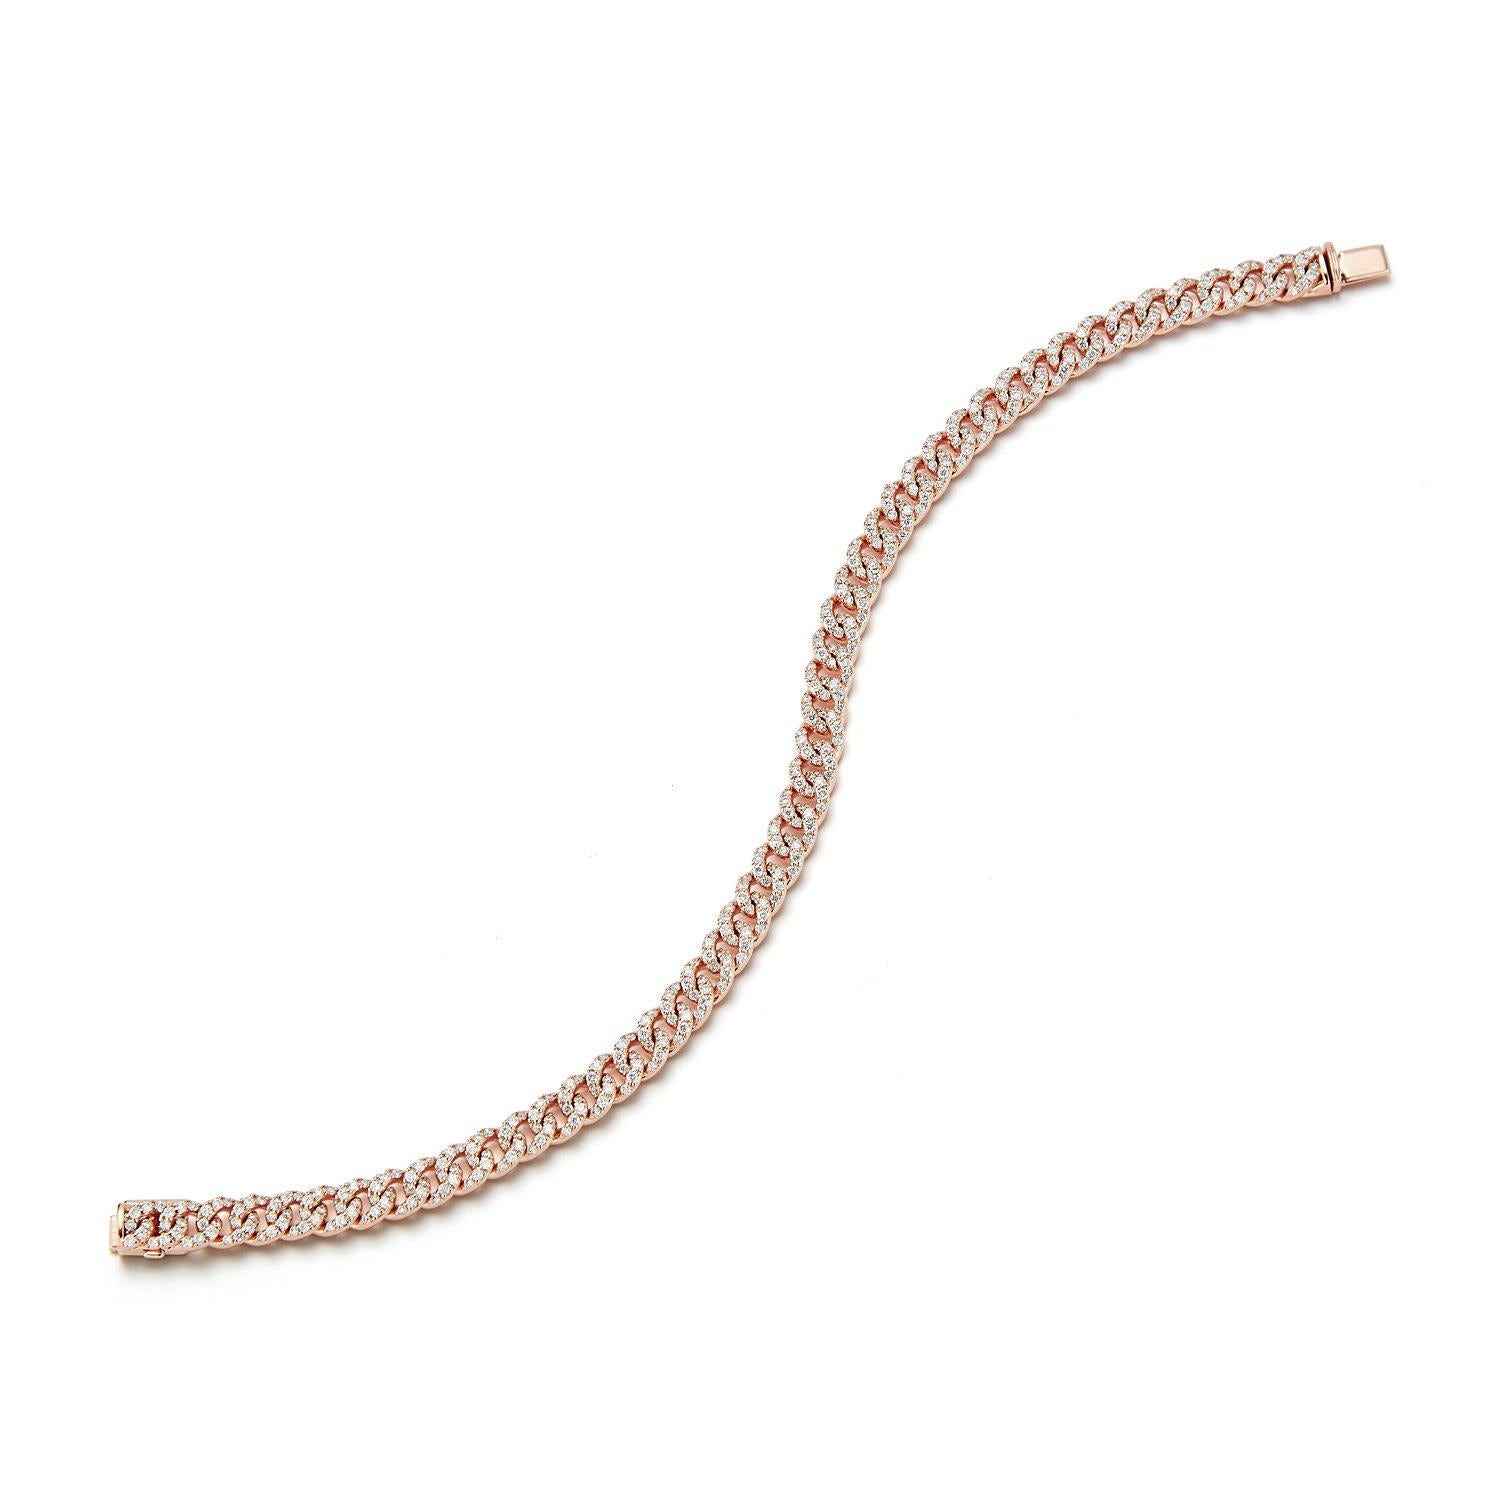 Walters Faith's Saxon Collection 18K Rose Gold and All Diamond Curb Link Bracelet. 2.24 Diamond Carat Weight. Bracelet measures 7 inches long. Each link is 4mm wide. Links are solid, ﻿not hollow. Also available for custom order in 18K Yellow gold.